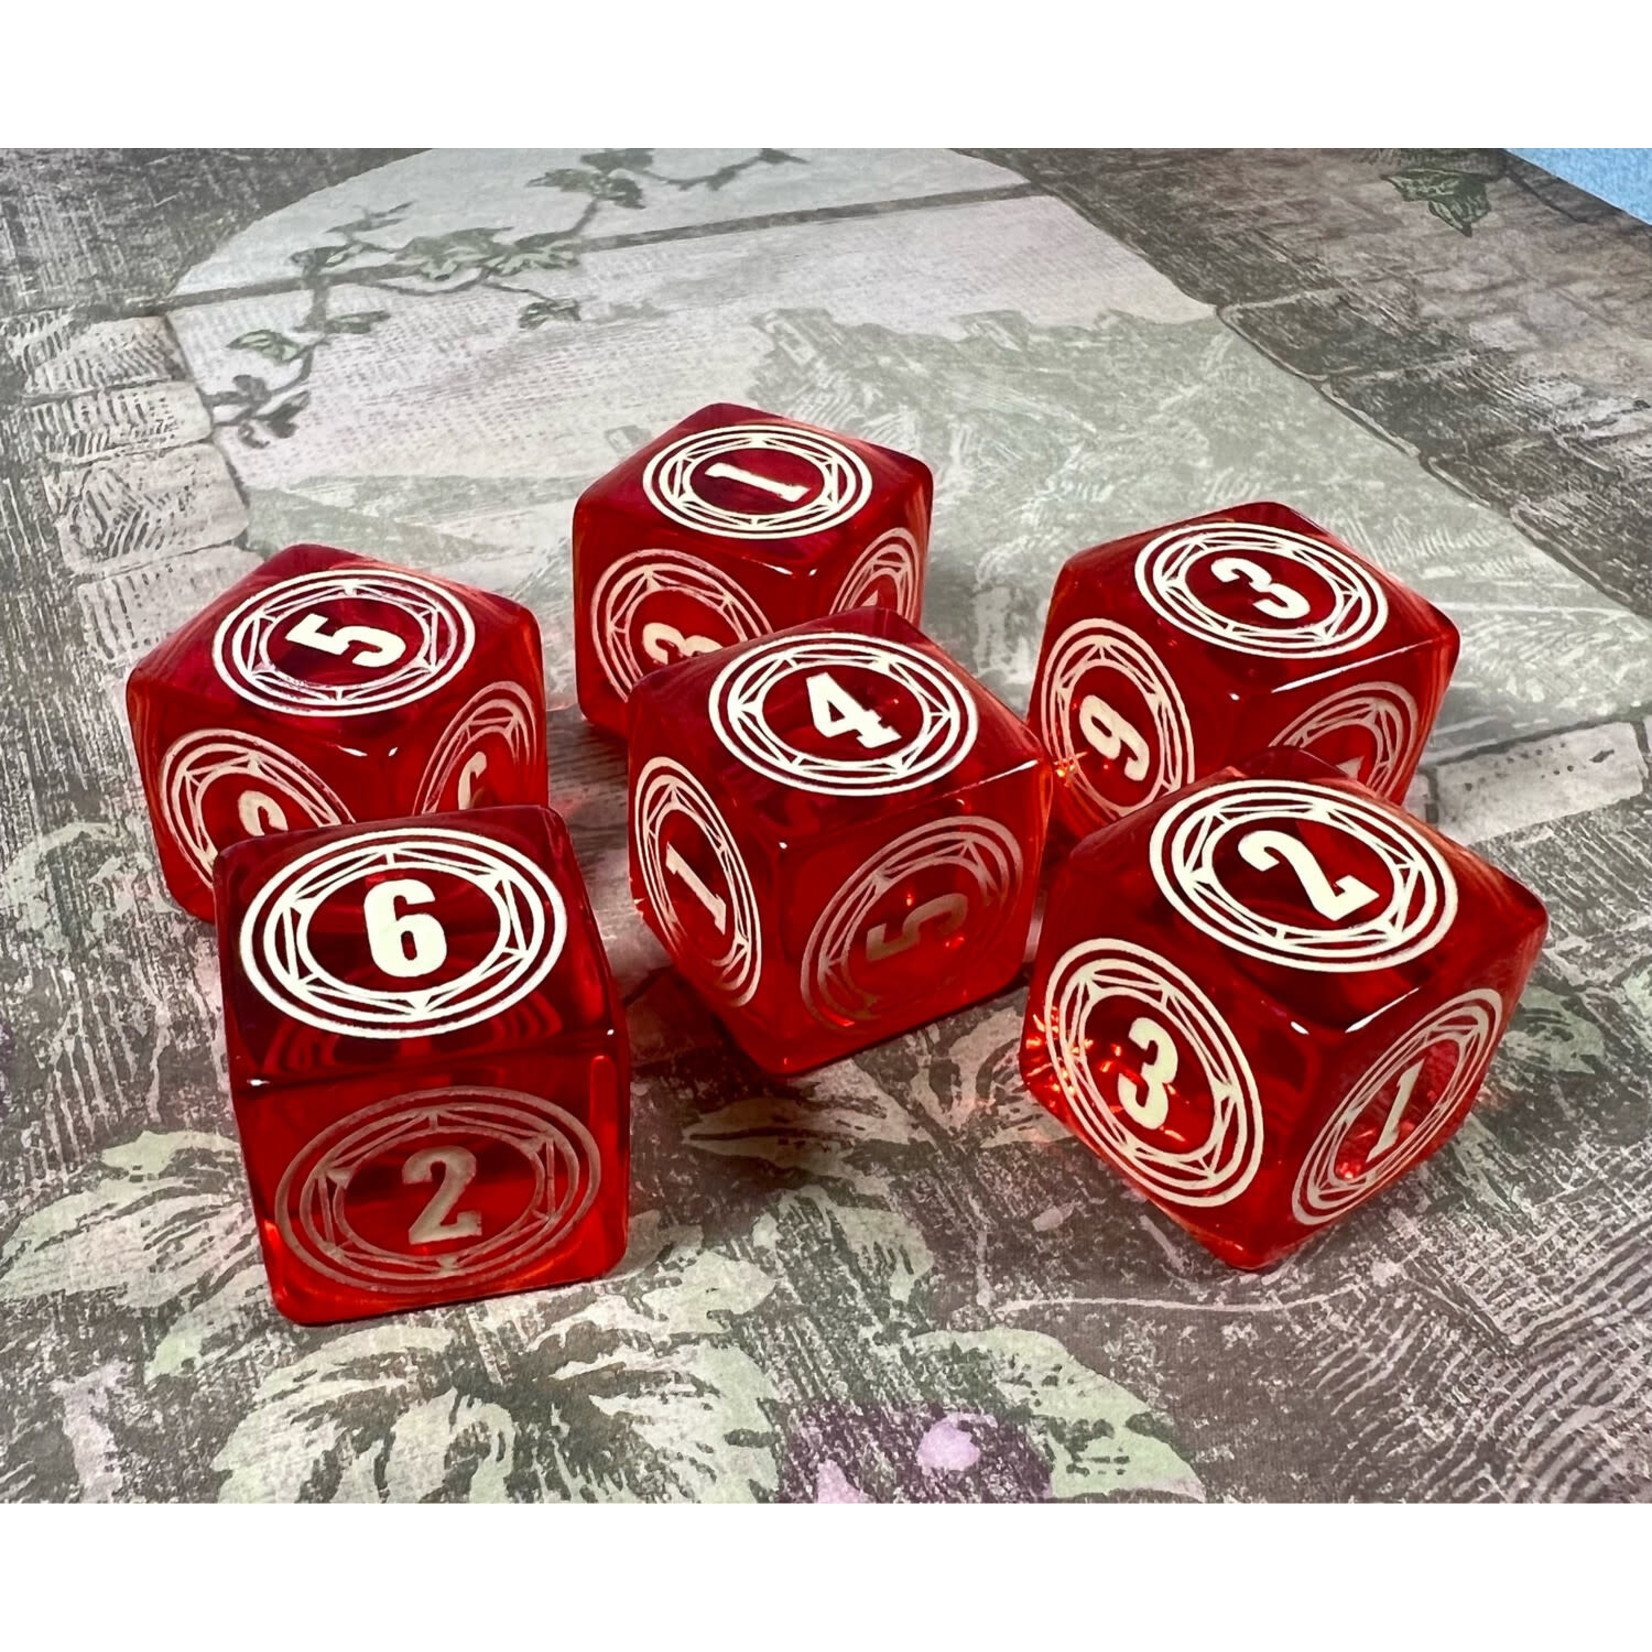 Alchemy D6 Dice - Pack of 6